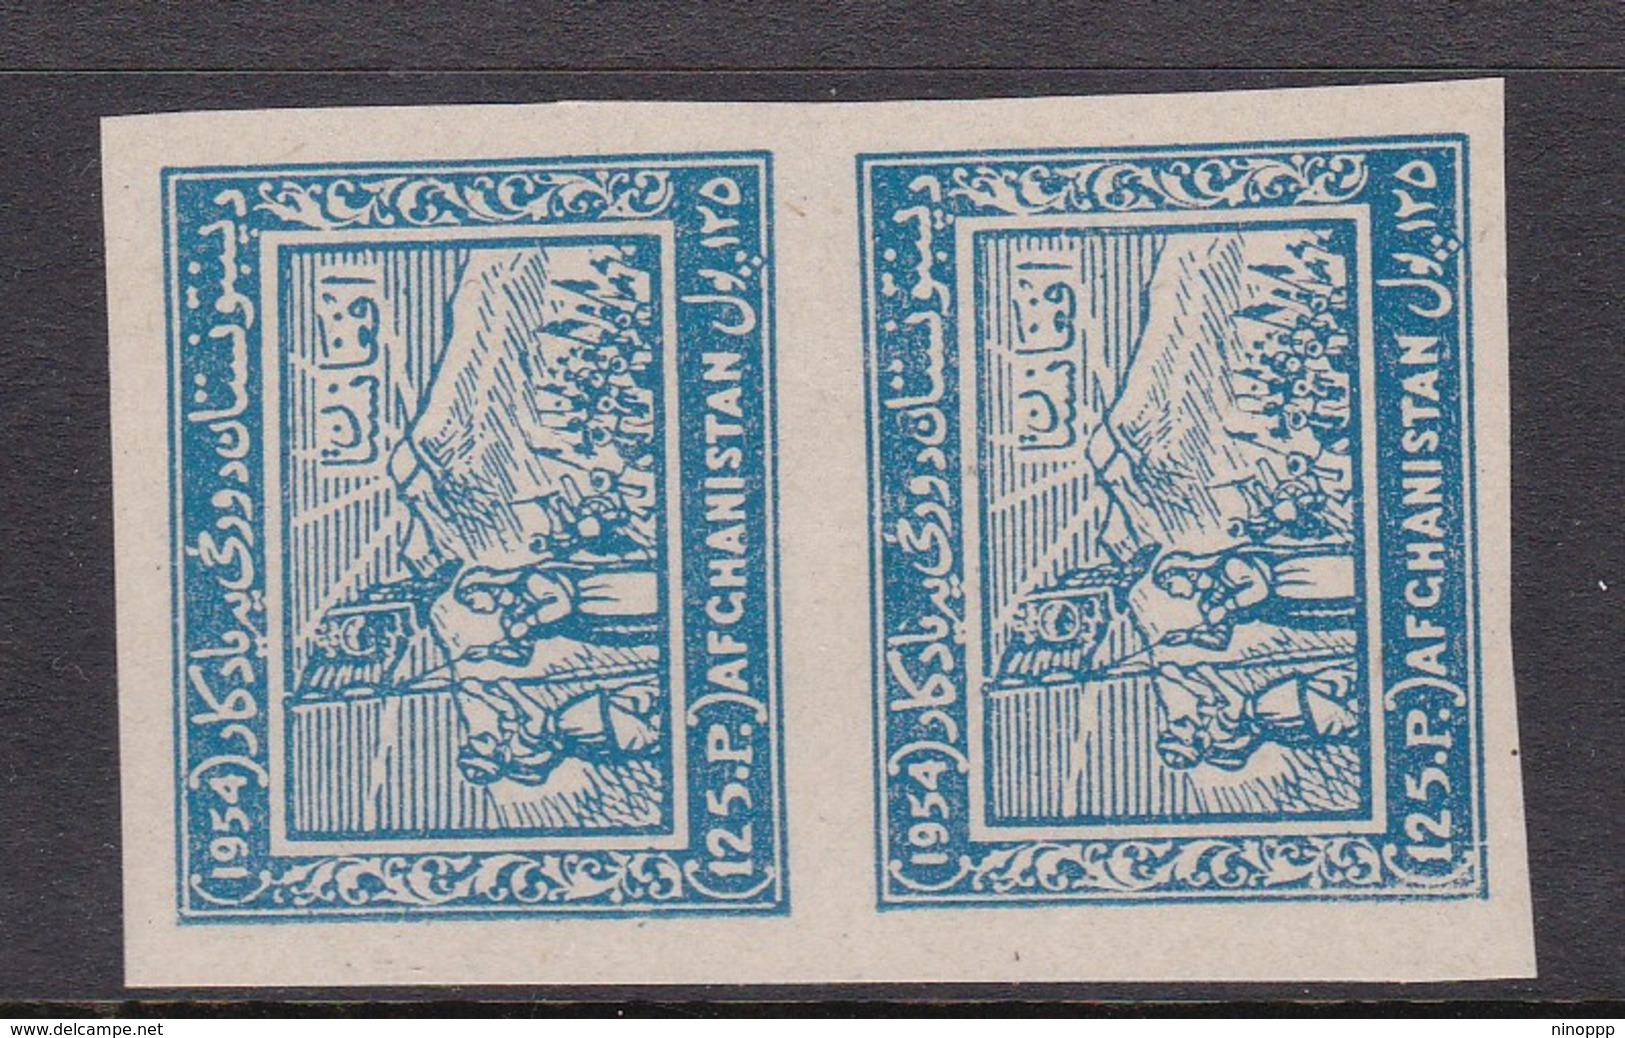 Afghanistan SG 386 1954 Pashtunistan Day 125p Blue Imperforated Pair  MNH - Afghanistan